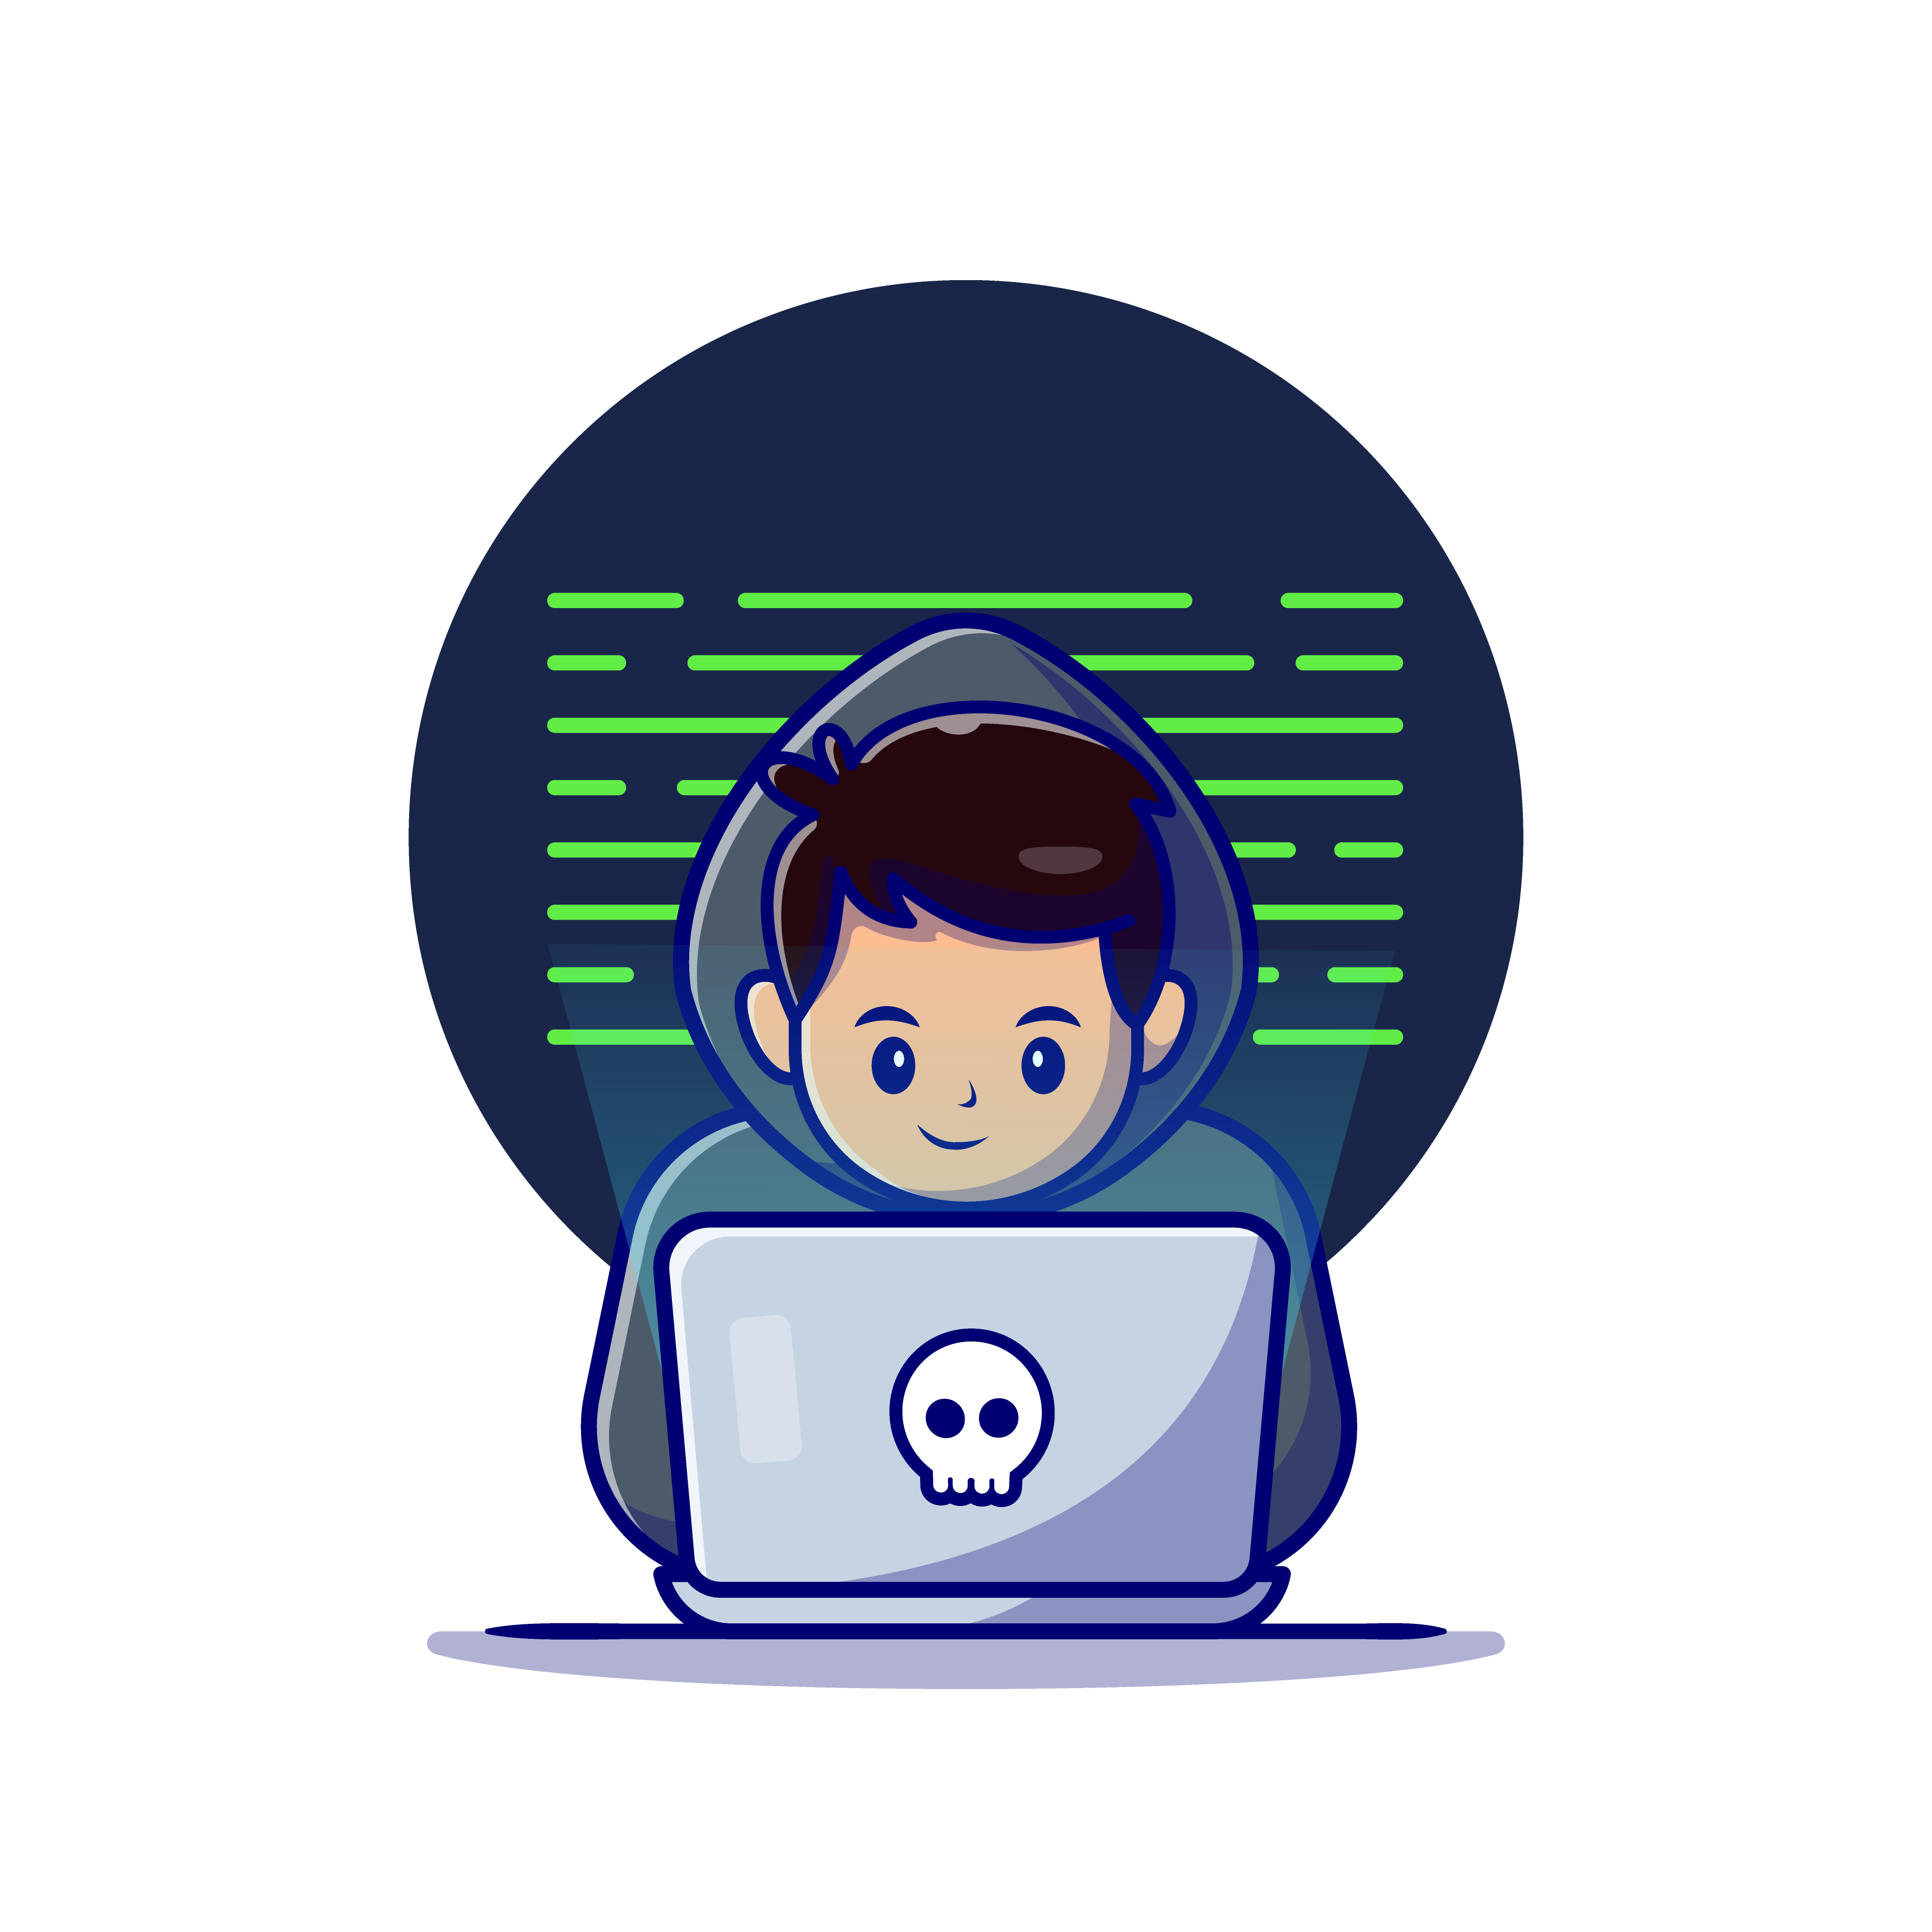 https://www.freepik.com/free-vector/hacker-operating-laptop-cartoon-icon-illustration-technology-icon-concept-isolated-flat-cartoon-style_11602236.htm#query=dibujo%20programador%20animado&position=3&from_view=search&track=ais